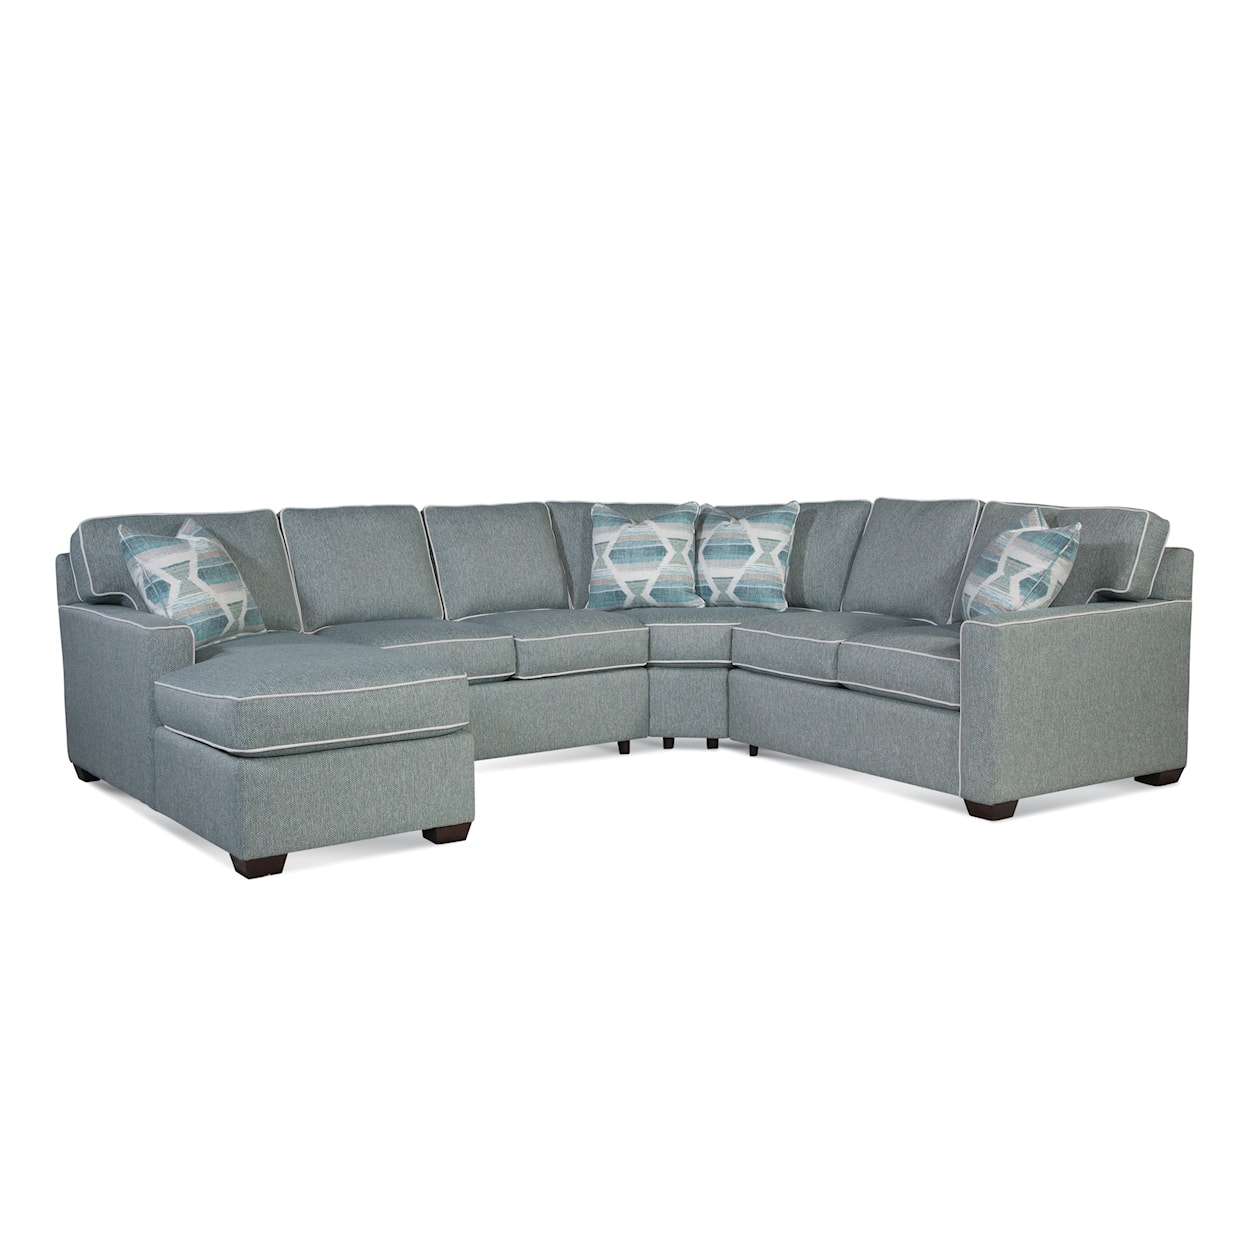 Braxton Culler Easton Chaise Sectional